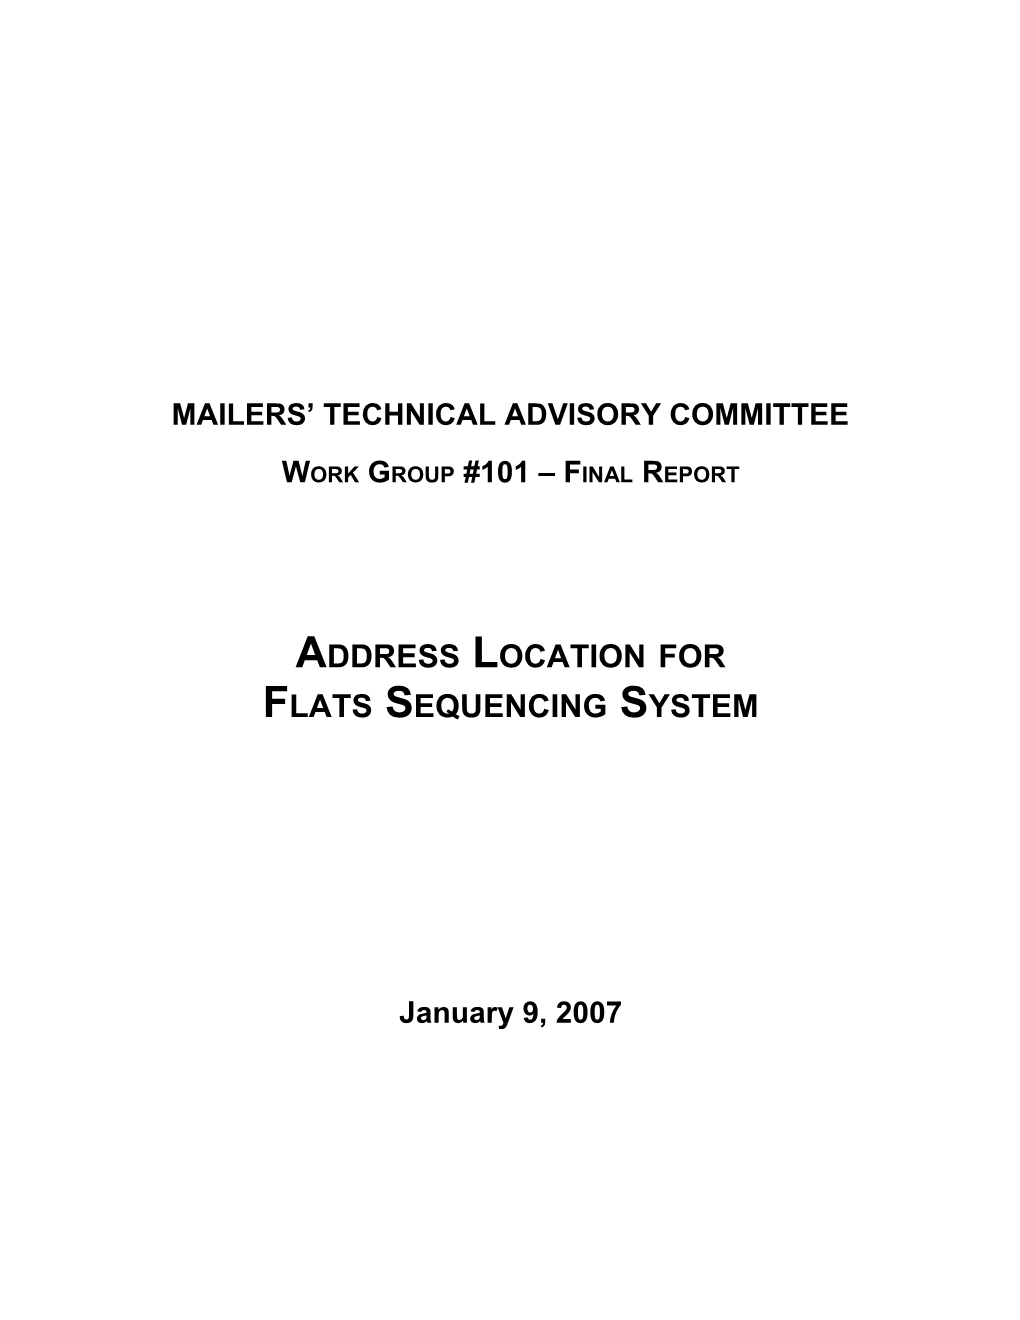 Address Placement for the Flats Sequencing System (FSS)